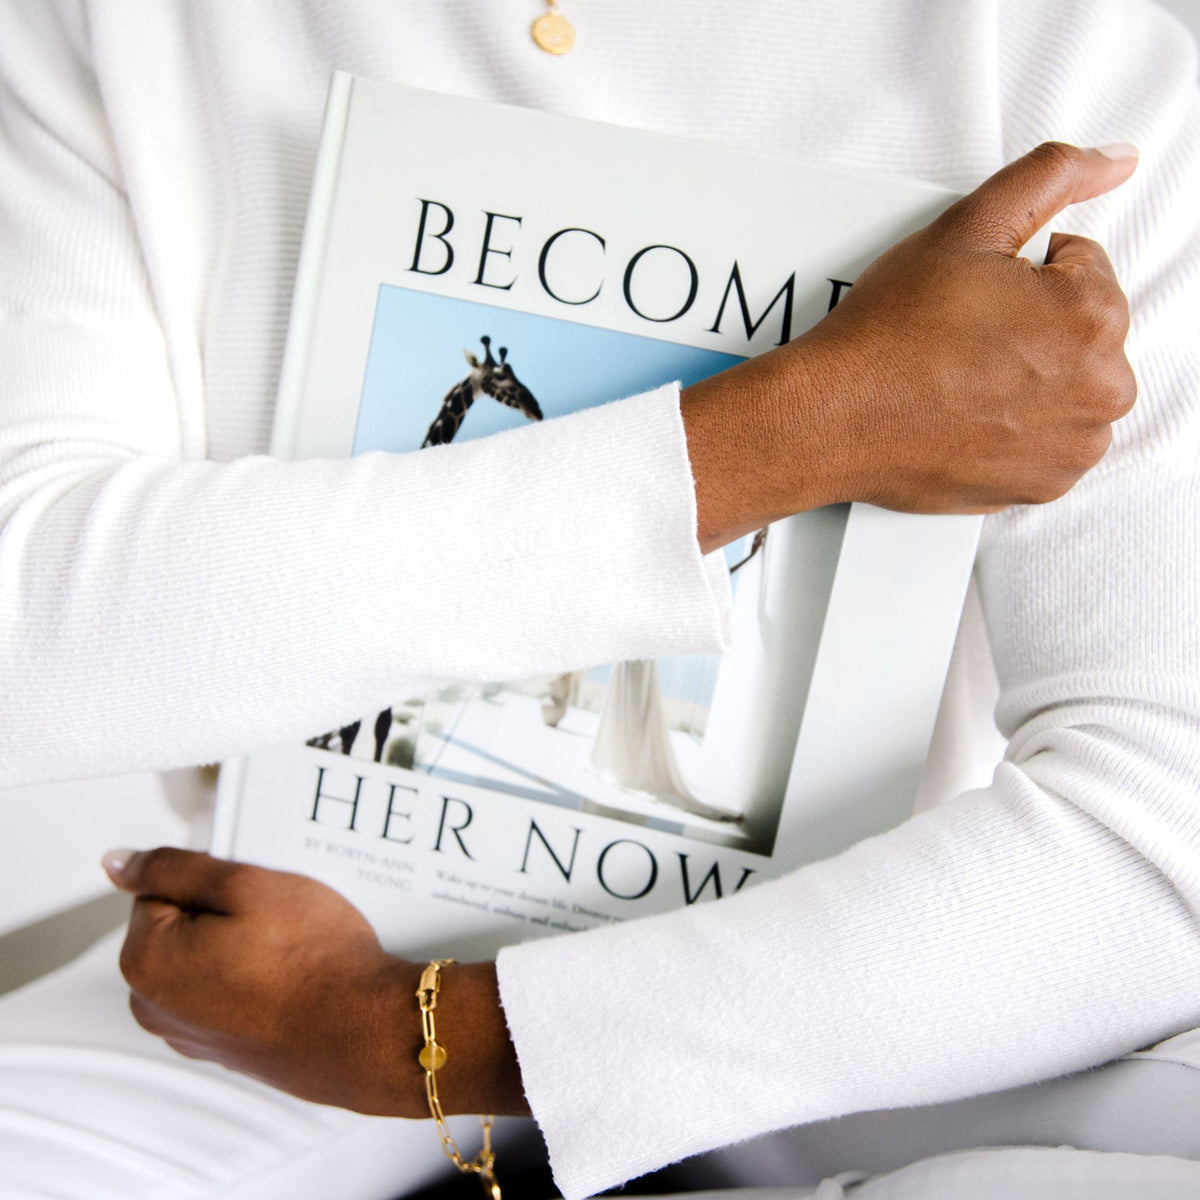 BECOME HER NOW | Bundled Course + Companion Playbook Shipped! *Softcover*